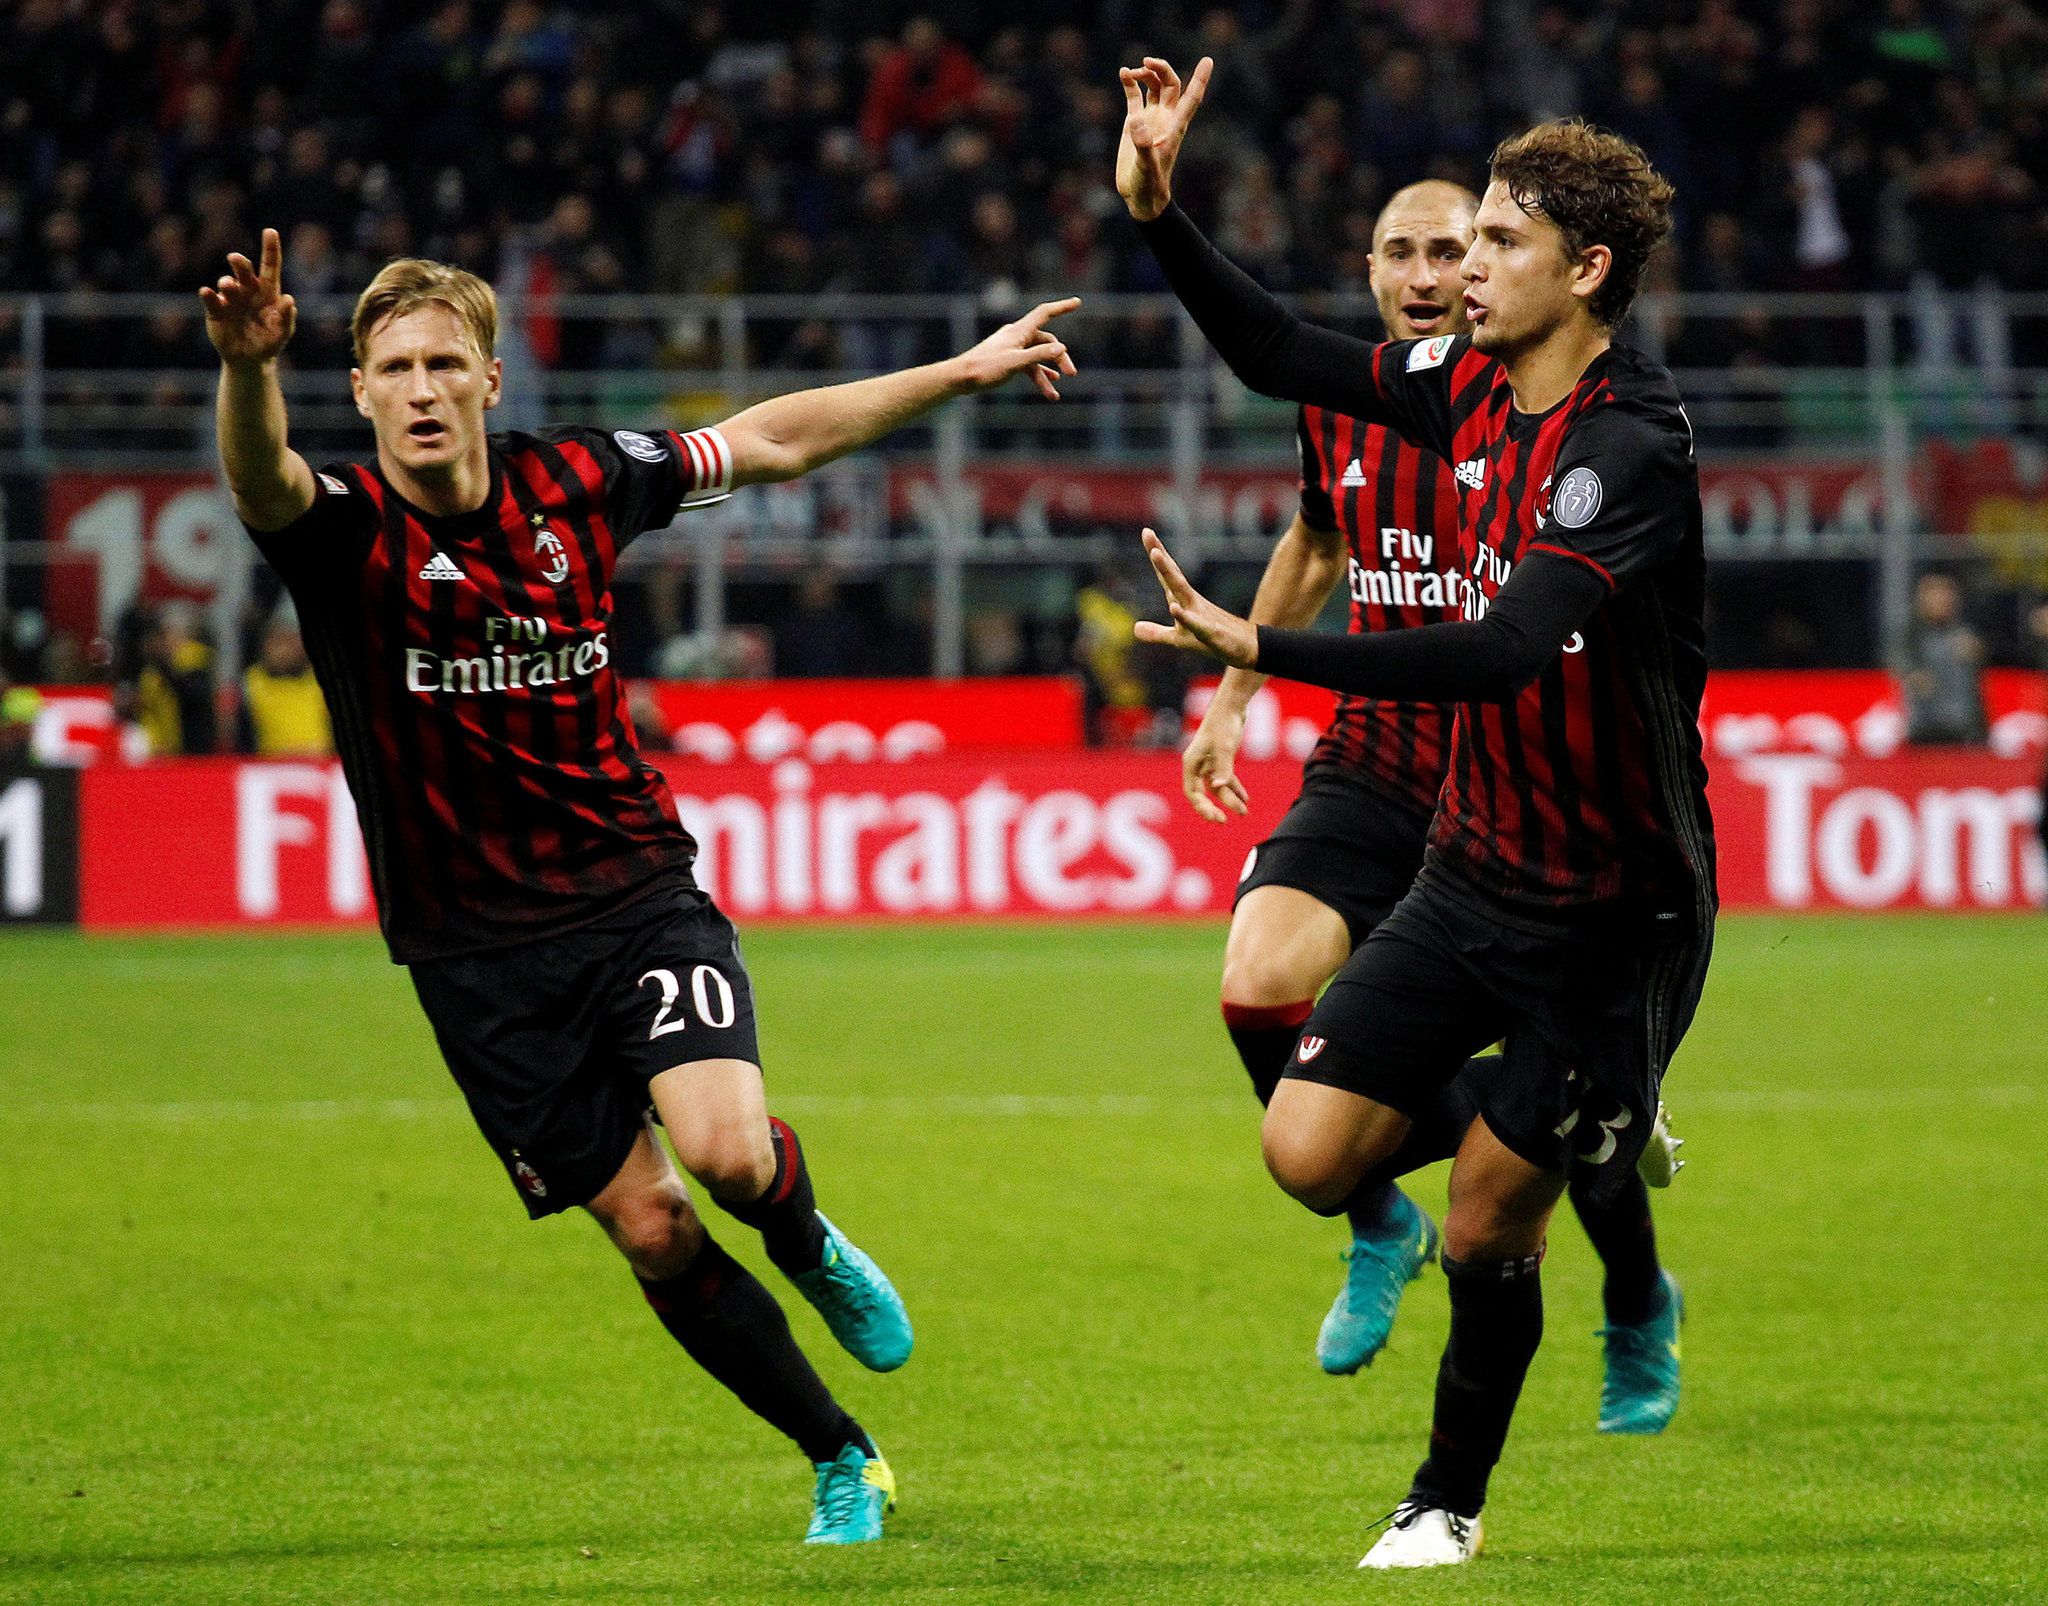 Push to Develop Young Players Revives A.C. Milan